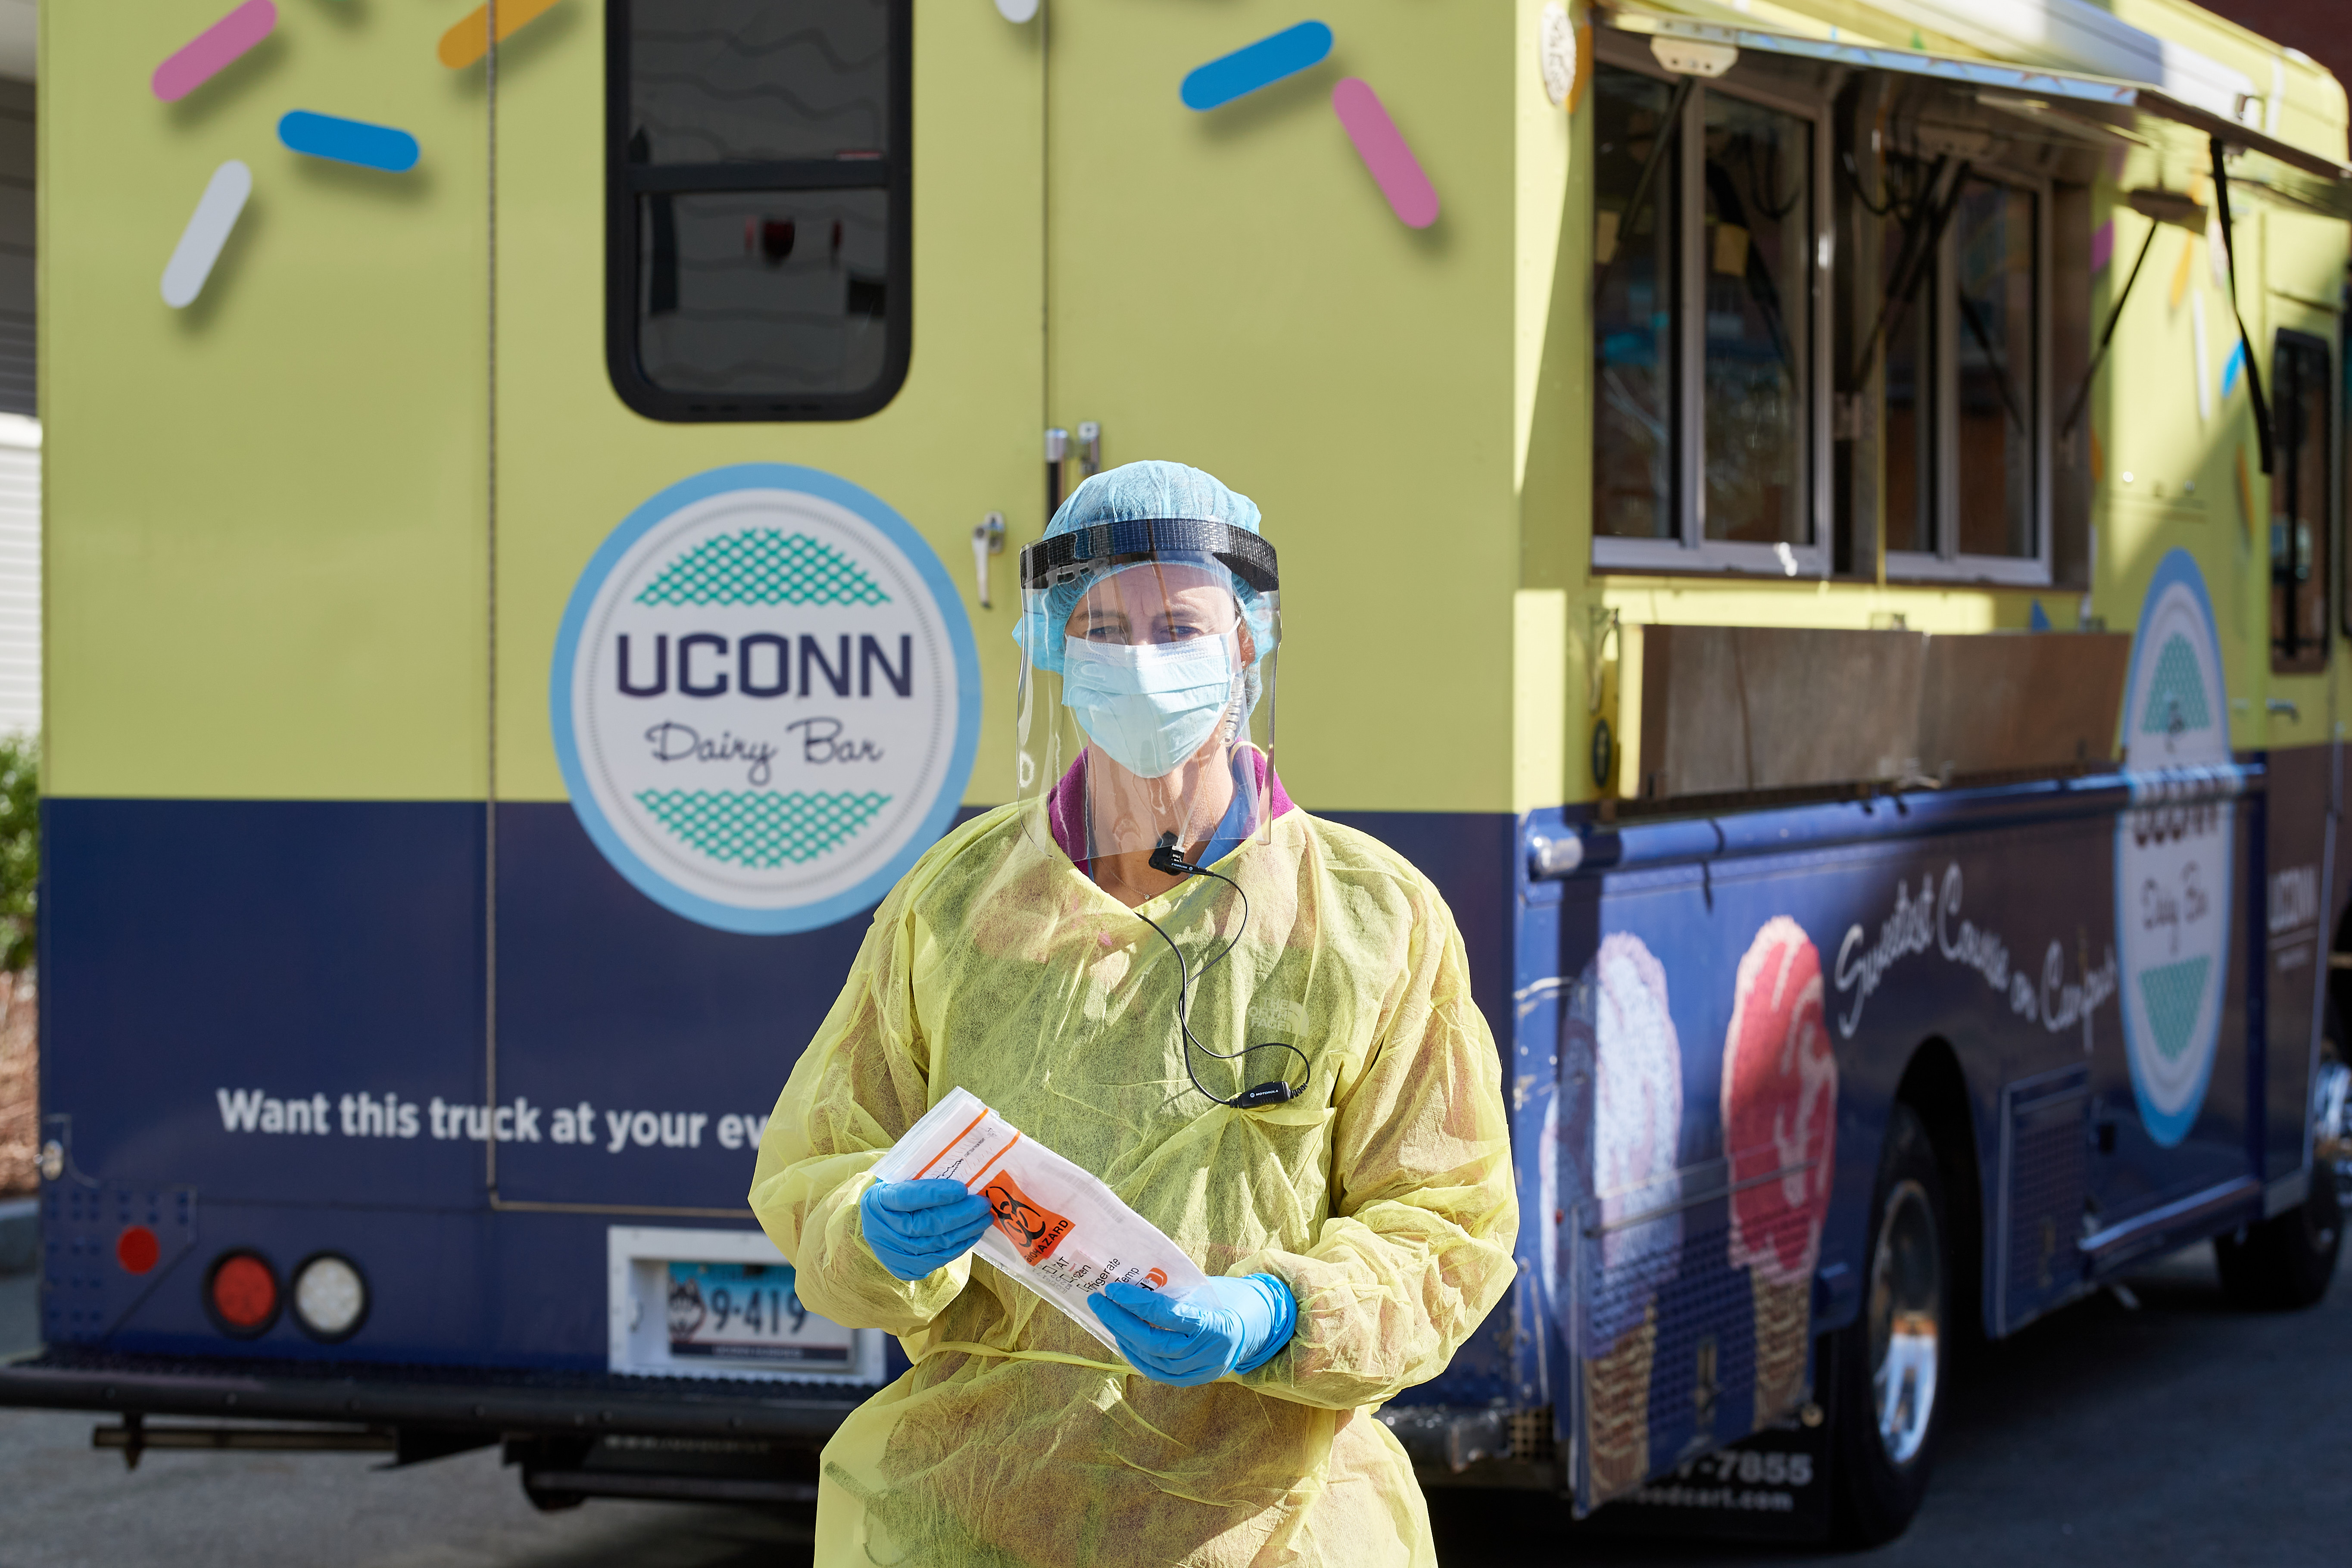 Beth Schweitzer '98 MD, takes a sample kit from the Dairy Bar truck pressed into service for drive up COVID-19 corona virus testing outside Student Health Services on April 14, 2020.